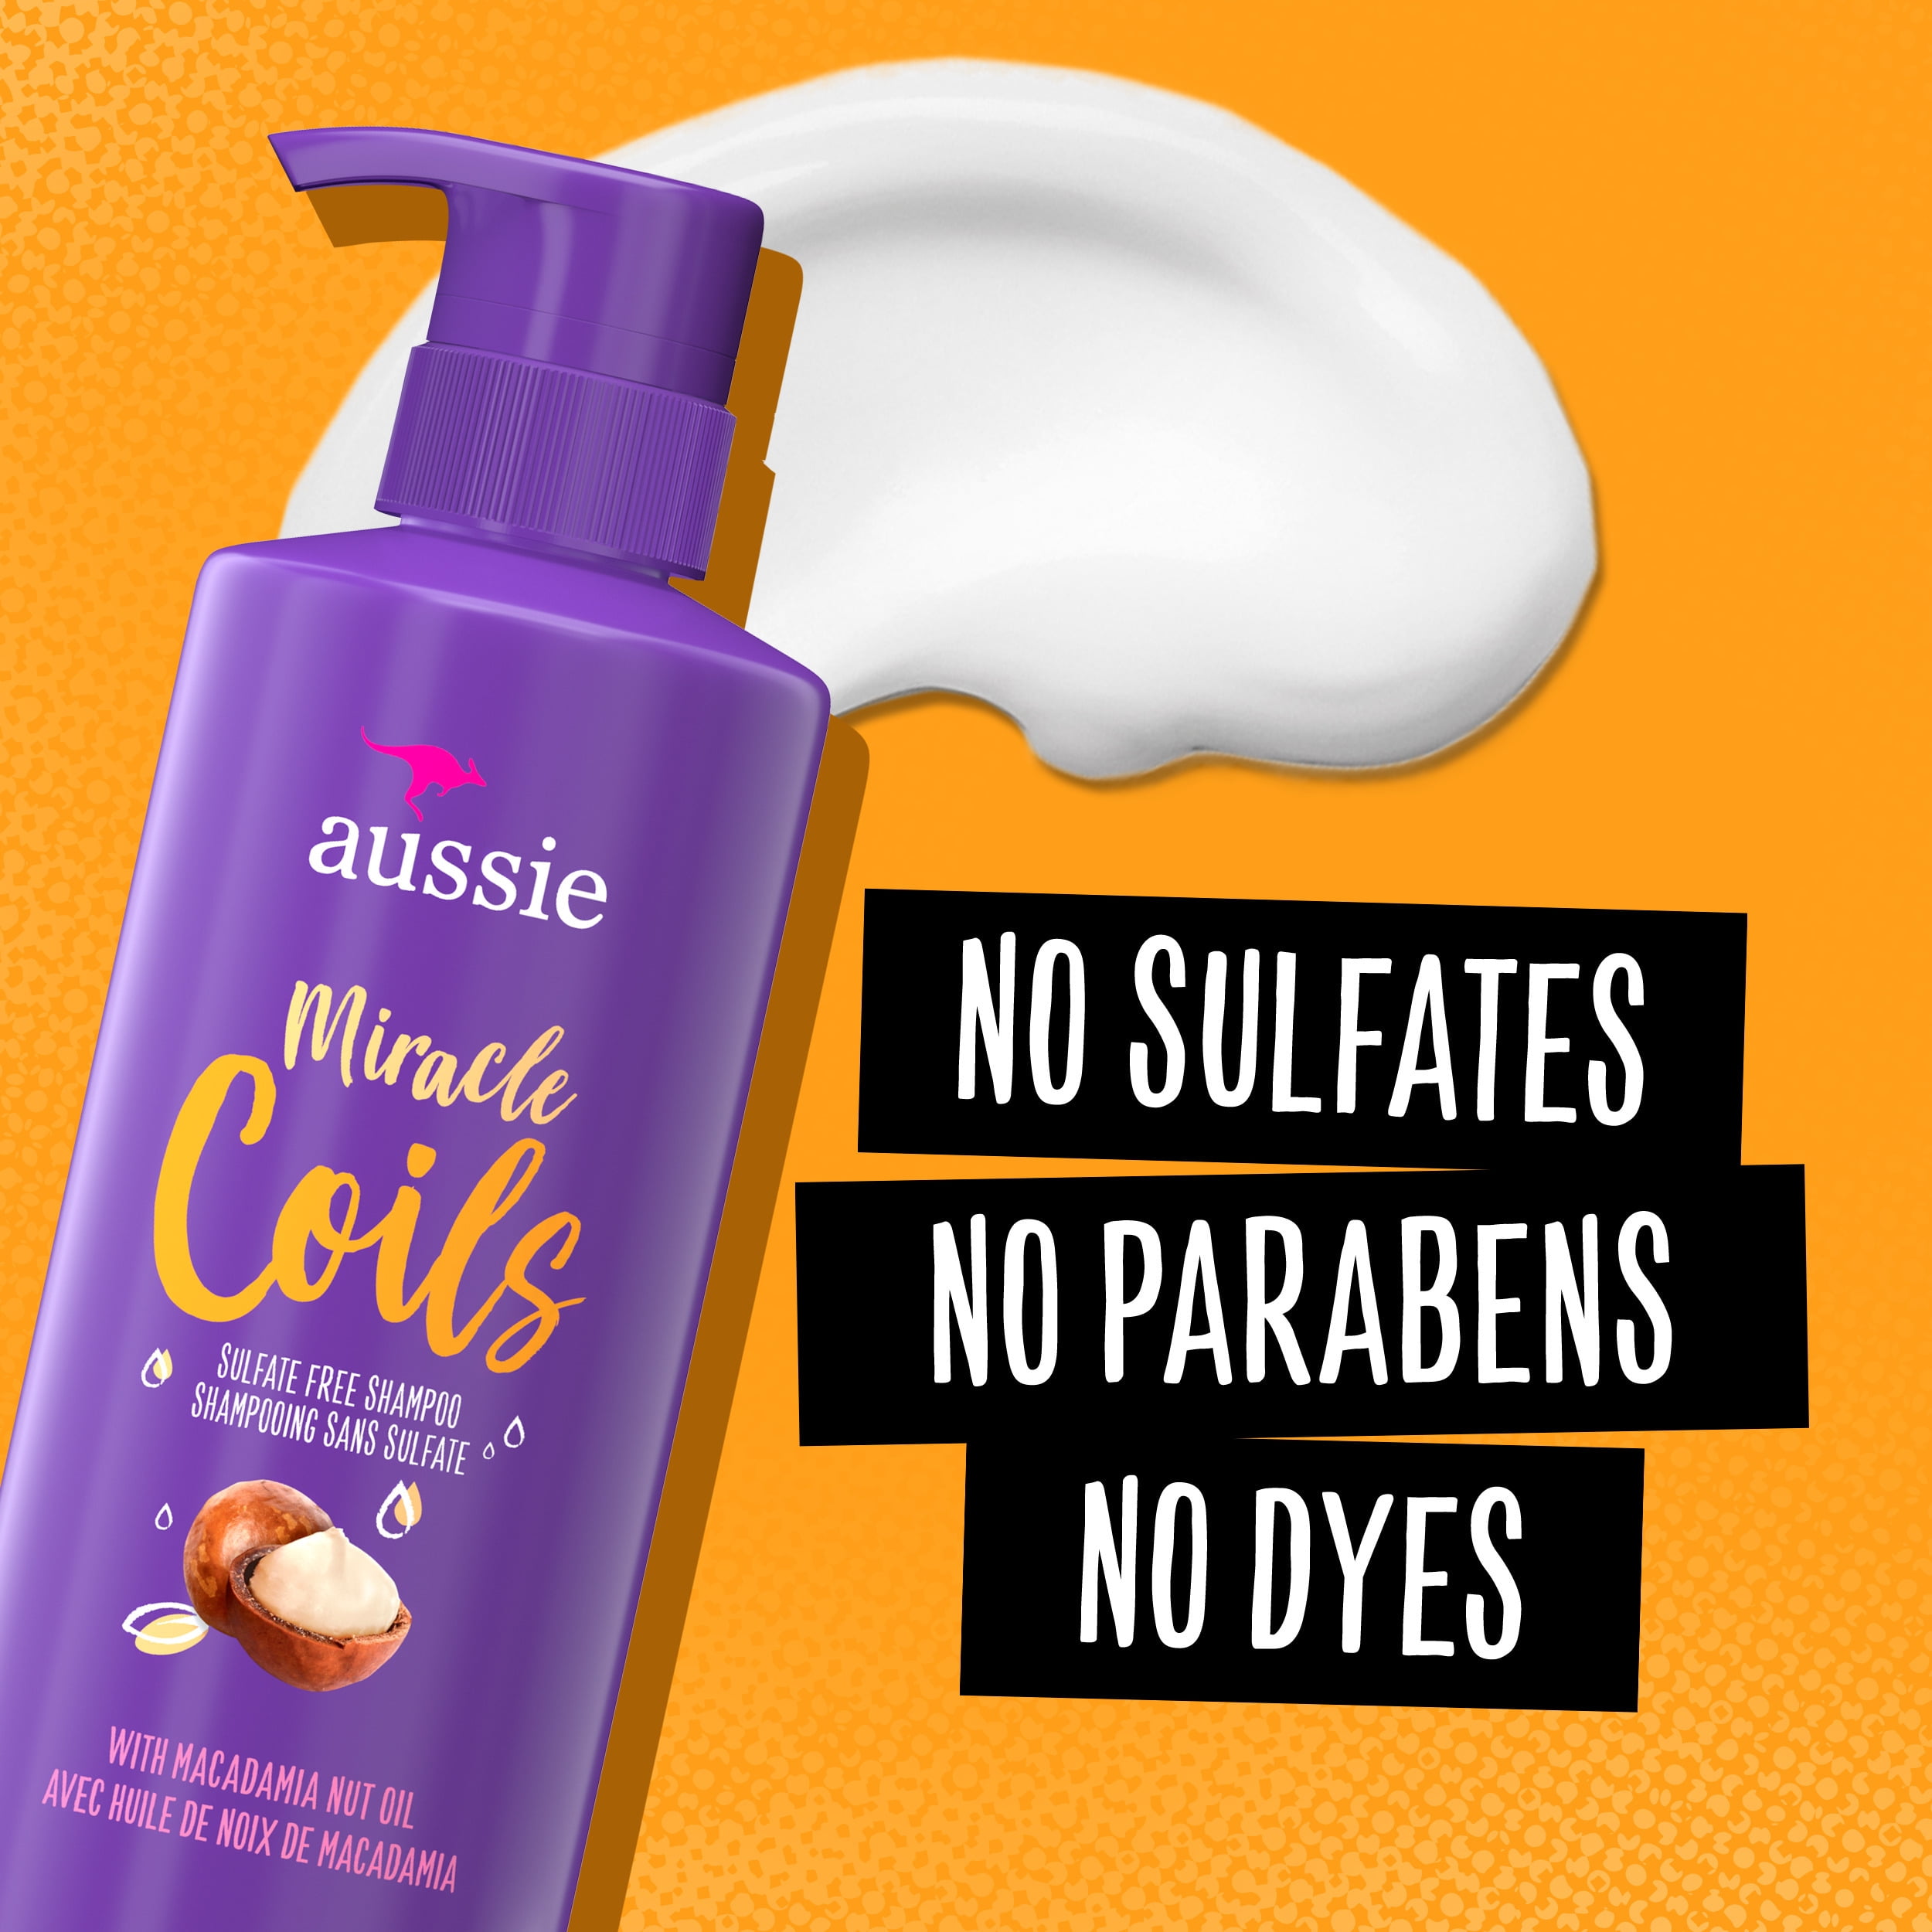 last Quagmire Chip Aussie Miracle Coils Sulfate-Free Shampoo for All Hair Types with Macadamia  Nut Oil, Paraben Free, 16 fl oz - Walmart.com